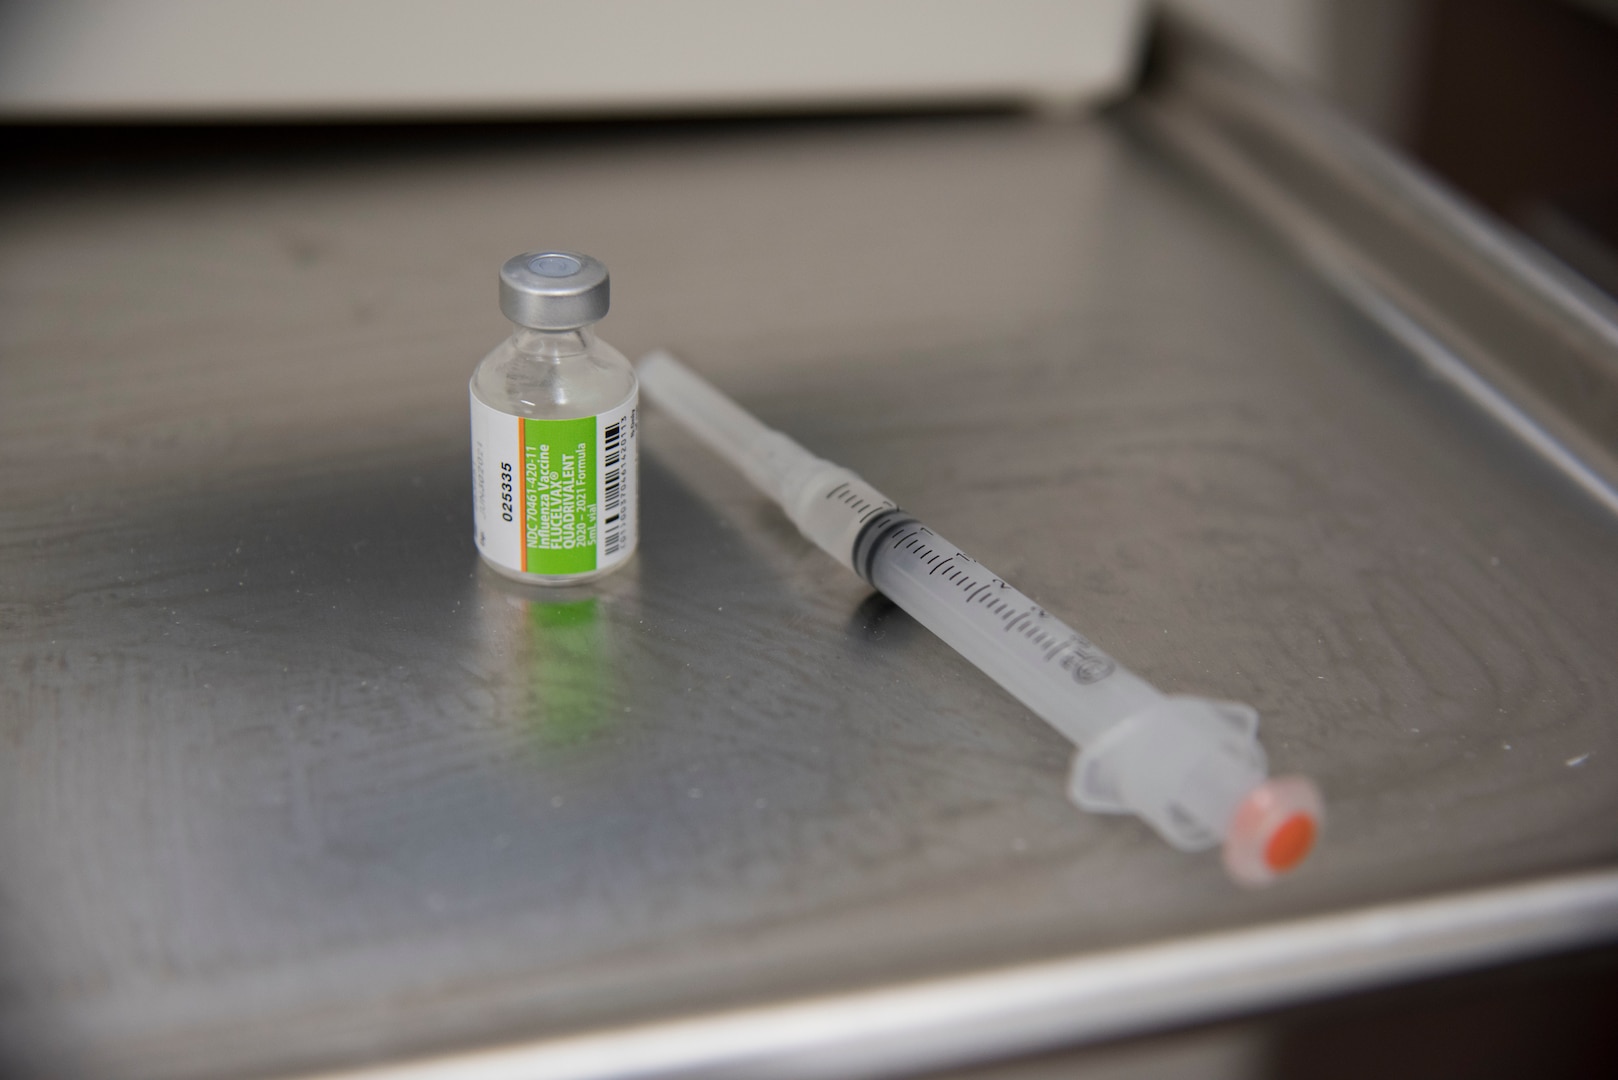 An influenza vaccine sits with a syringe on a medical tray